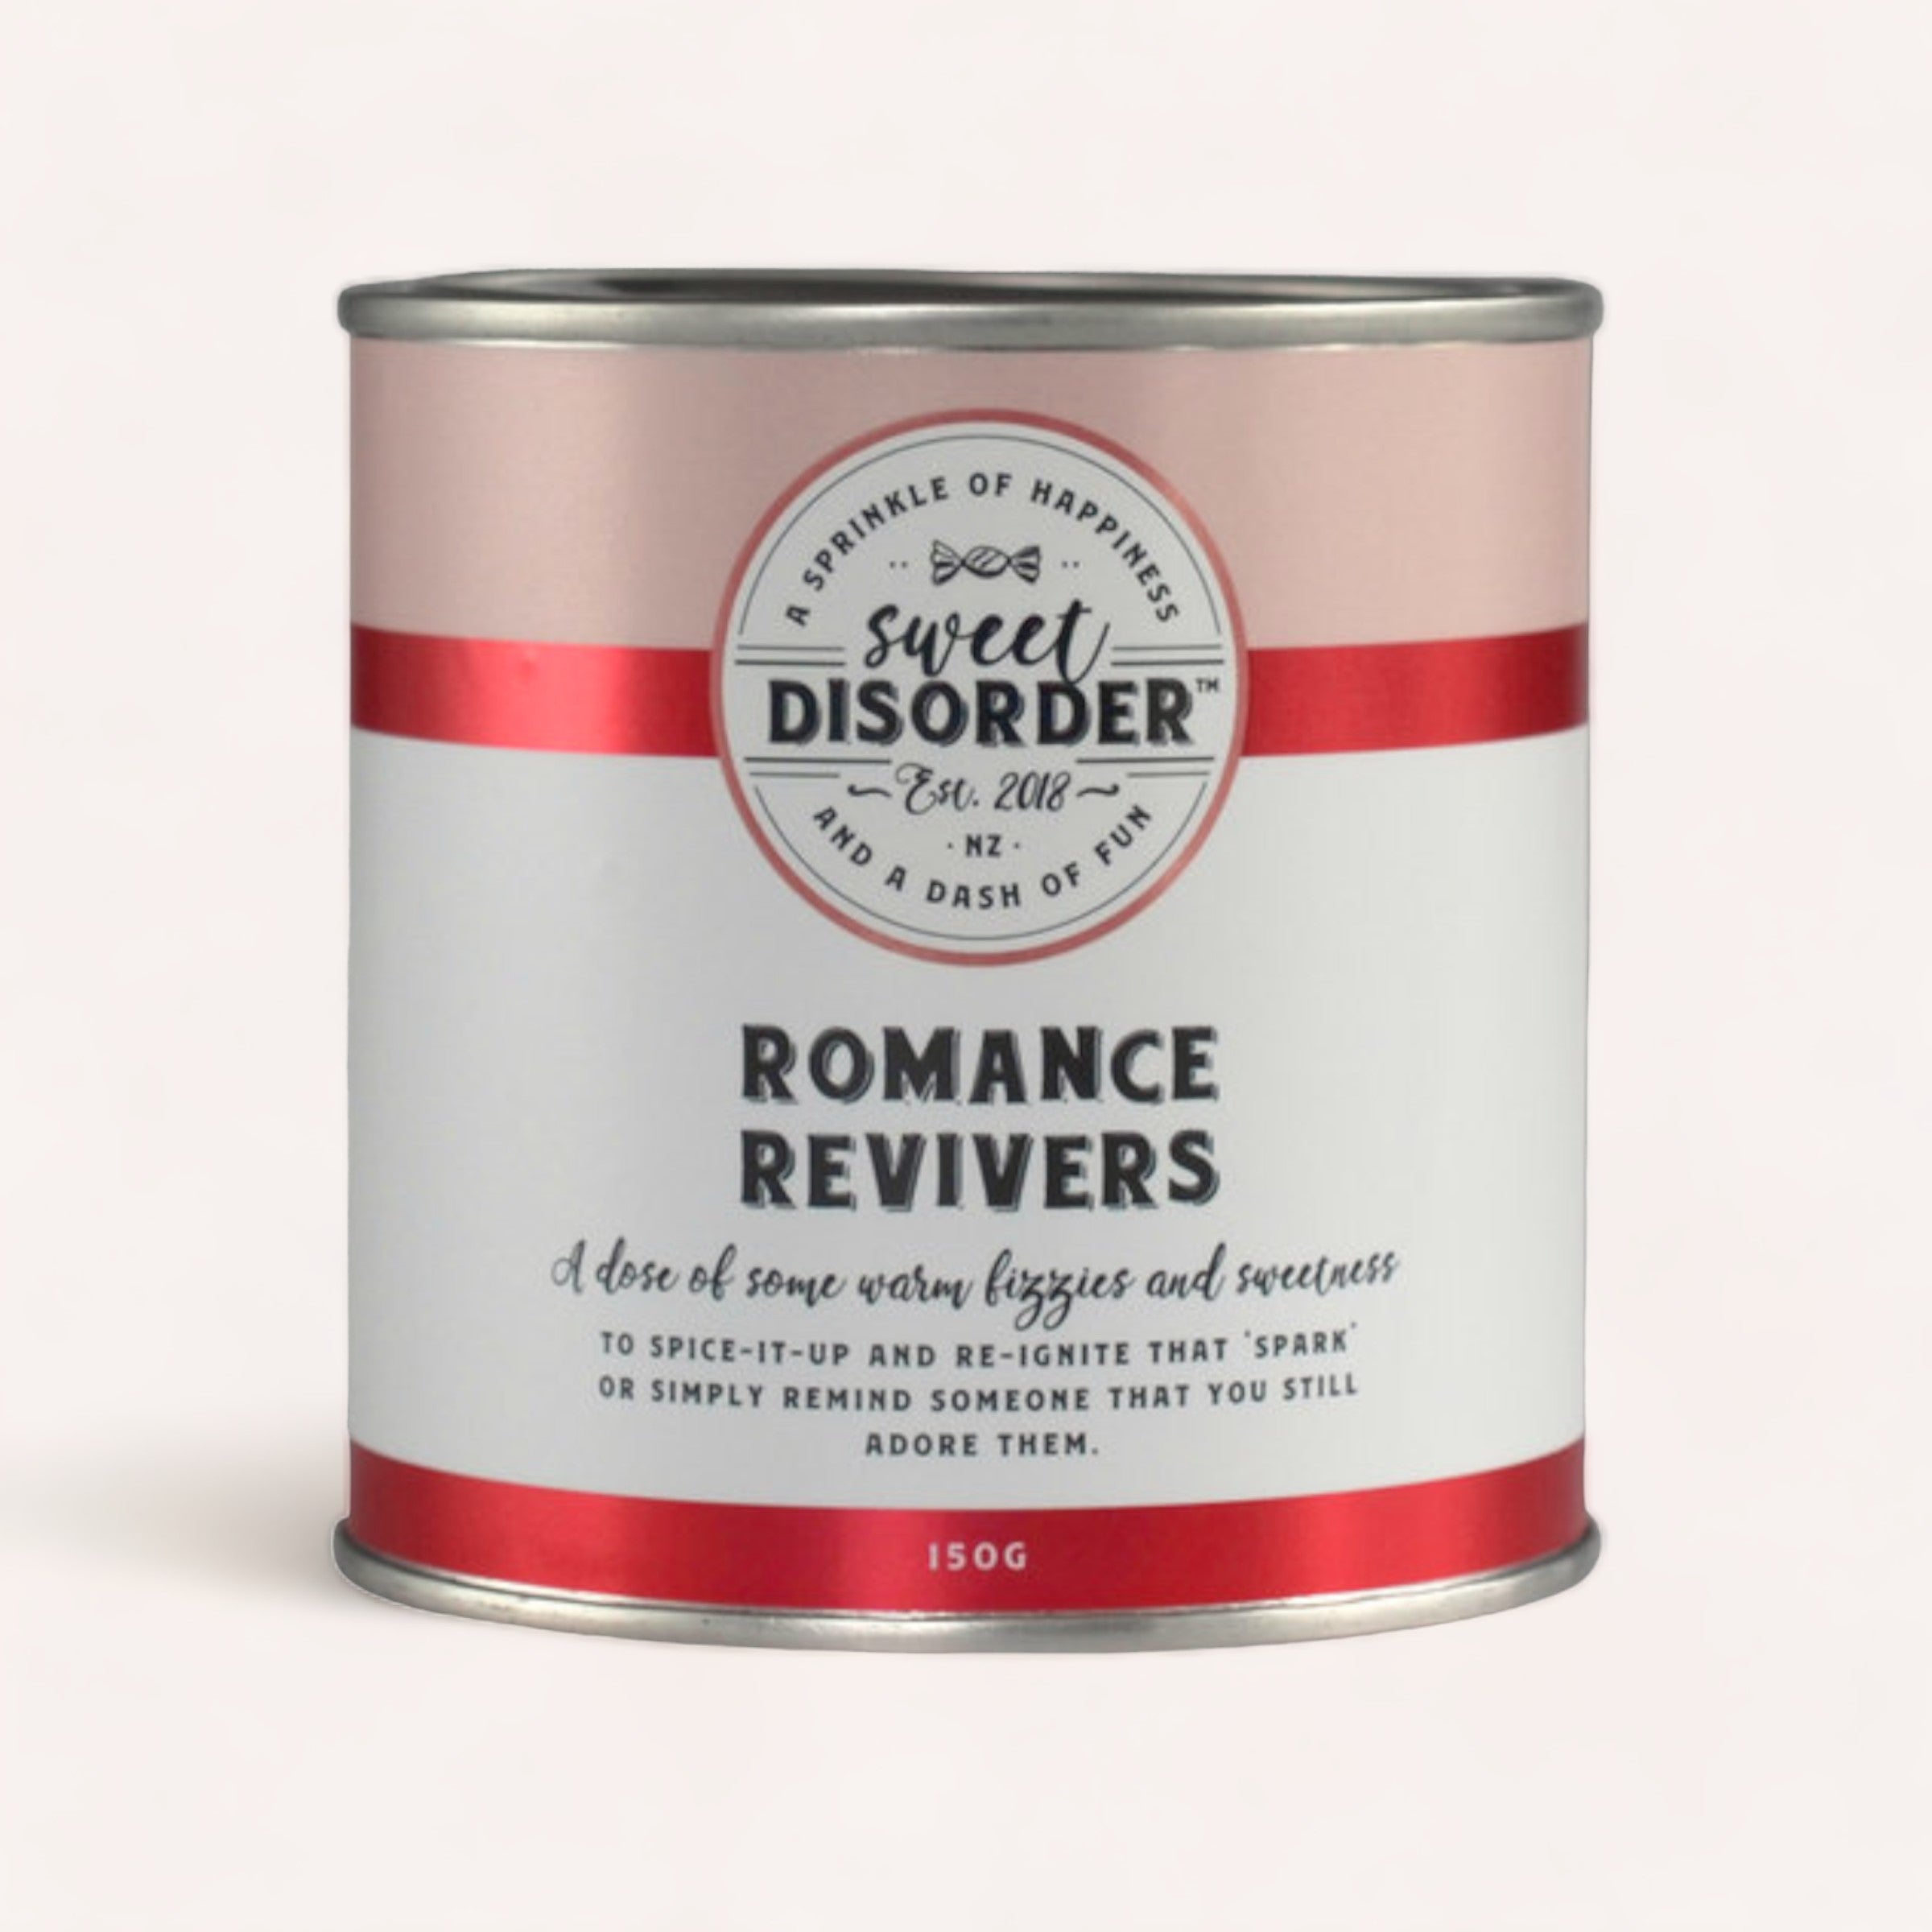 A whimsically labeled canister of Romance Revivers Lollies by Sweet Disorder from New Zealand, suggesting a playful remedy filled with sour peach heart candy to enhance happiness and reignite the spark in a relationship.